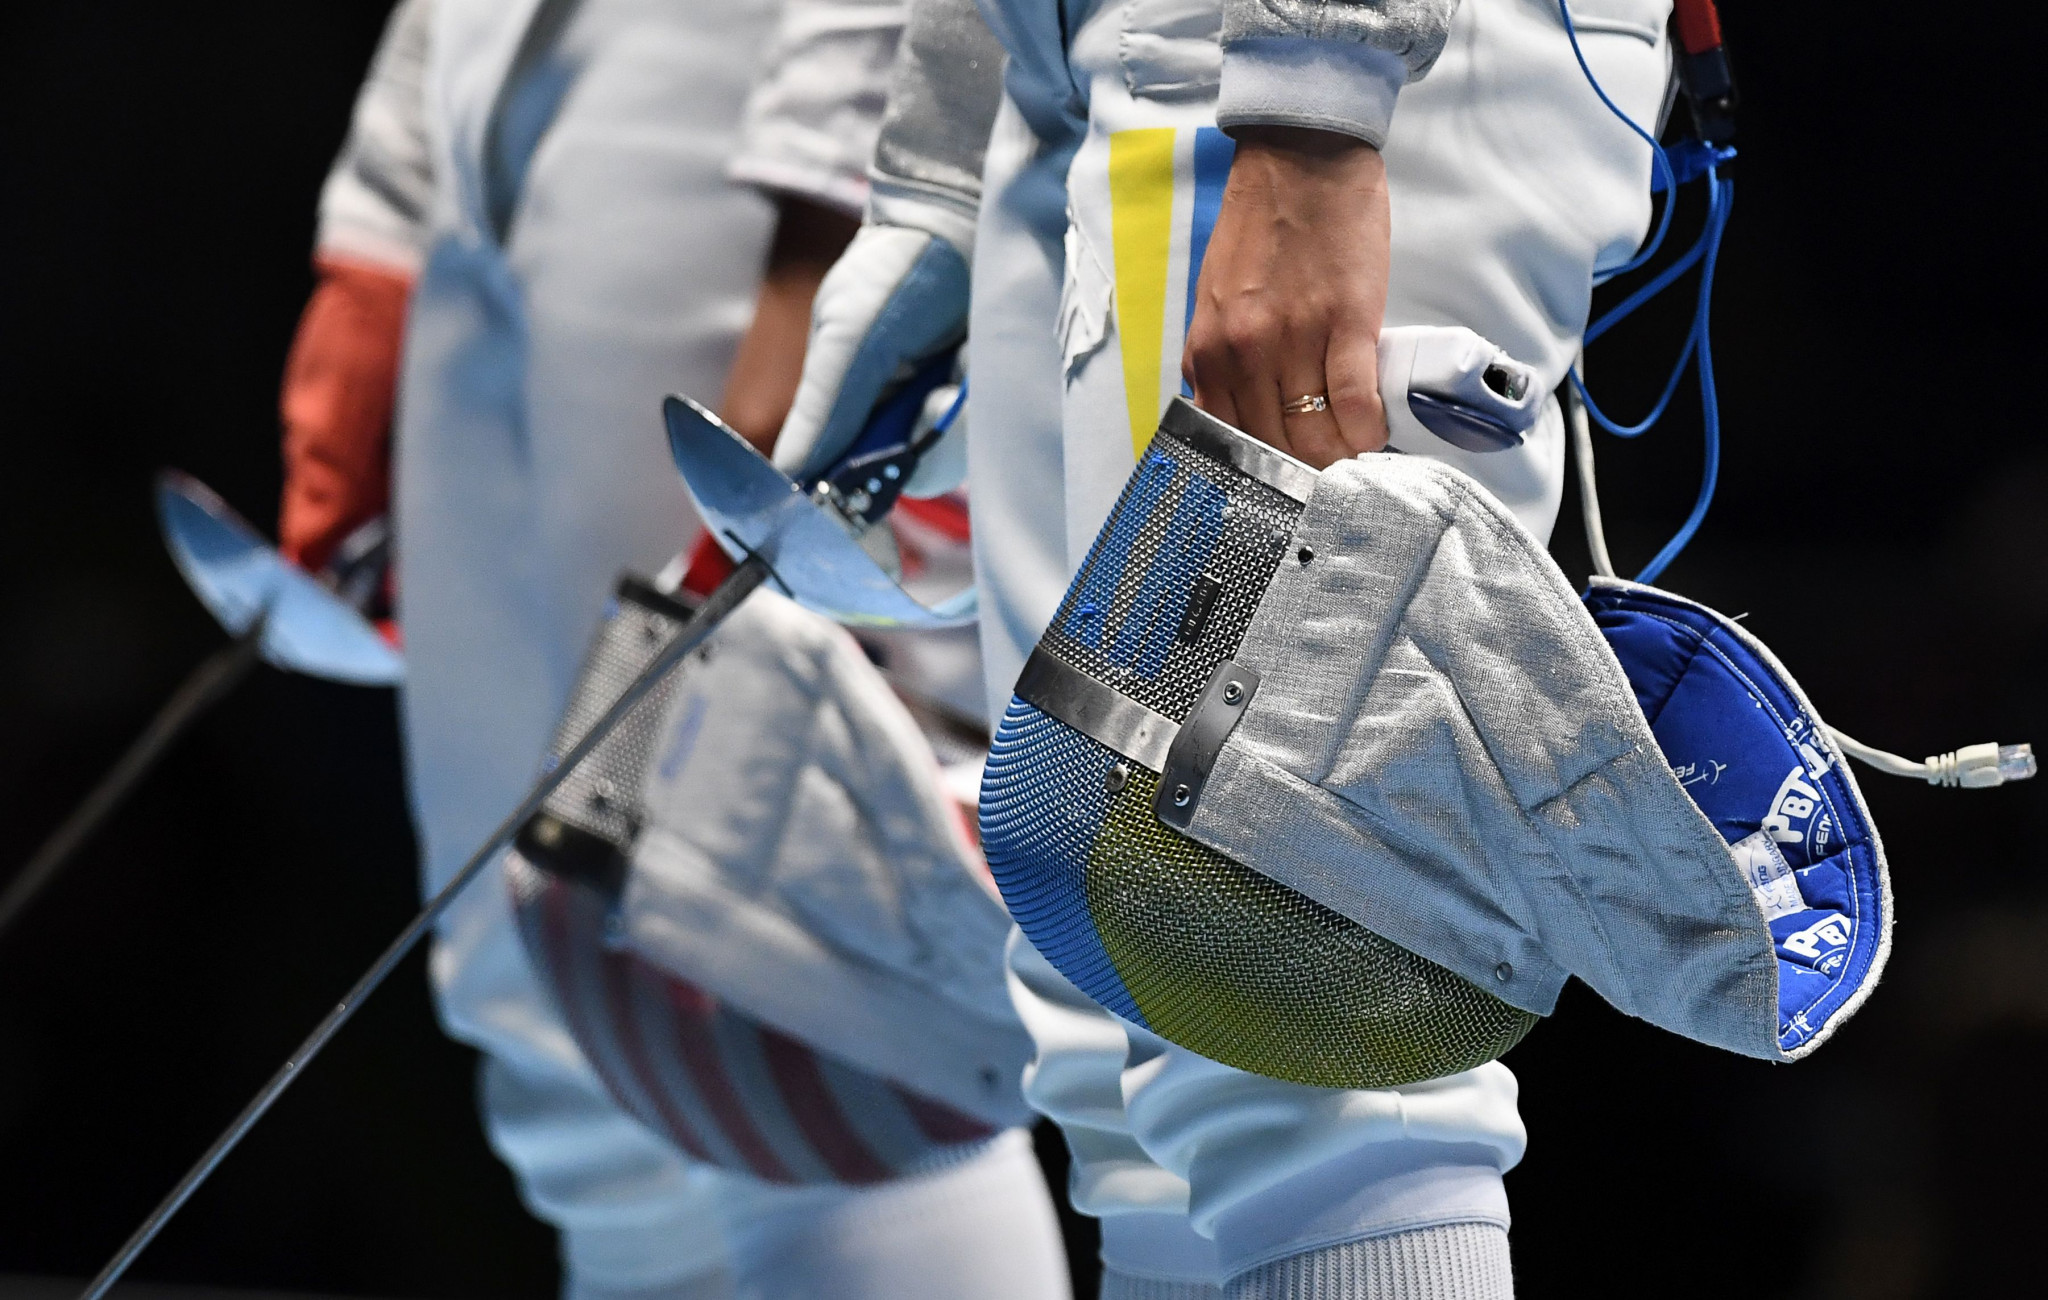 Athletes from the European Fencing Confederation condemned an IOC recommendation to allow Russians and Belarusians to return to international competition as neutrals ©Getty Images